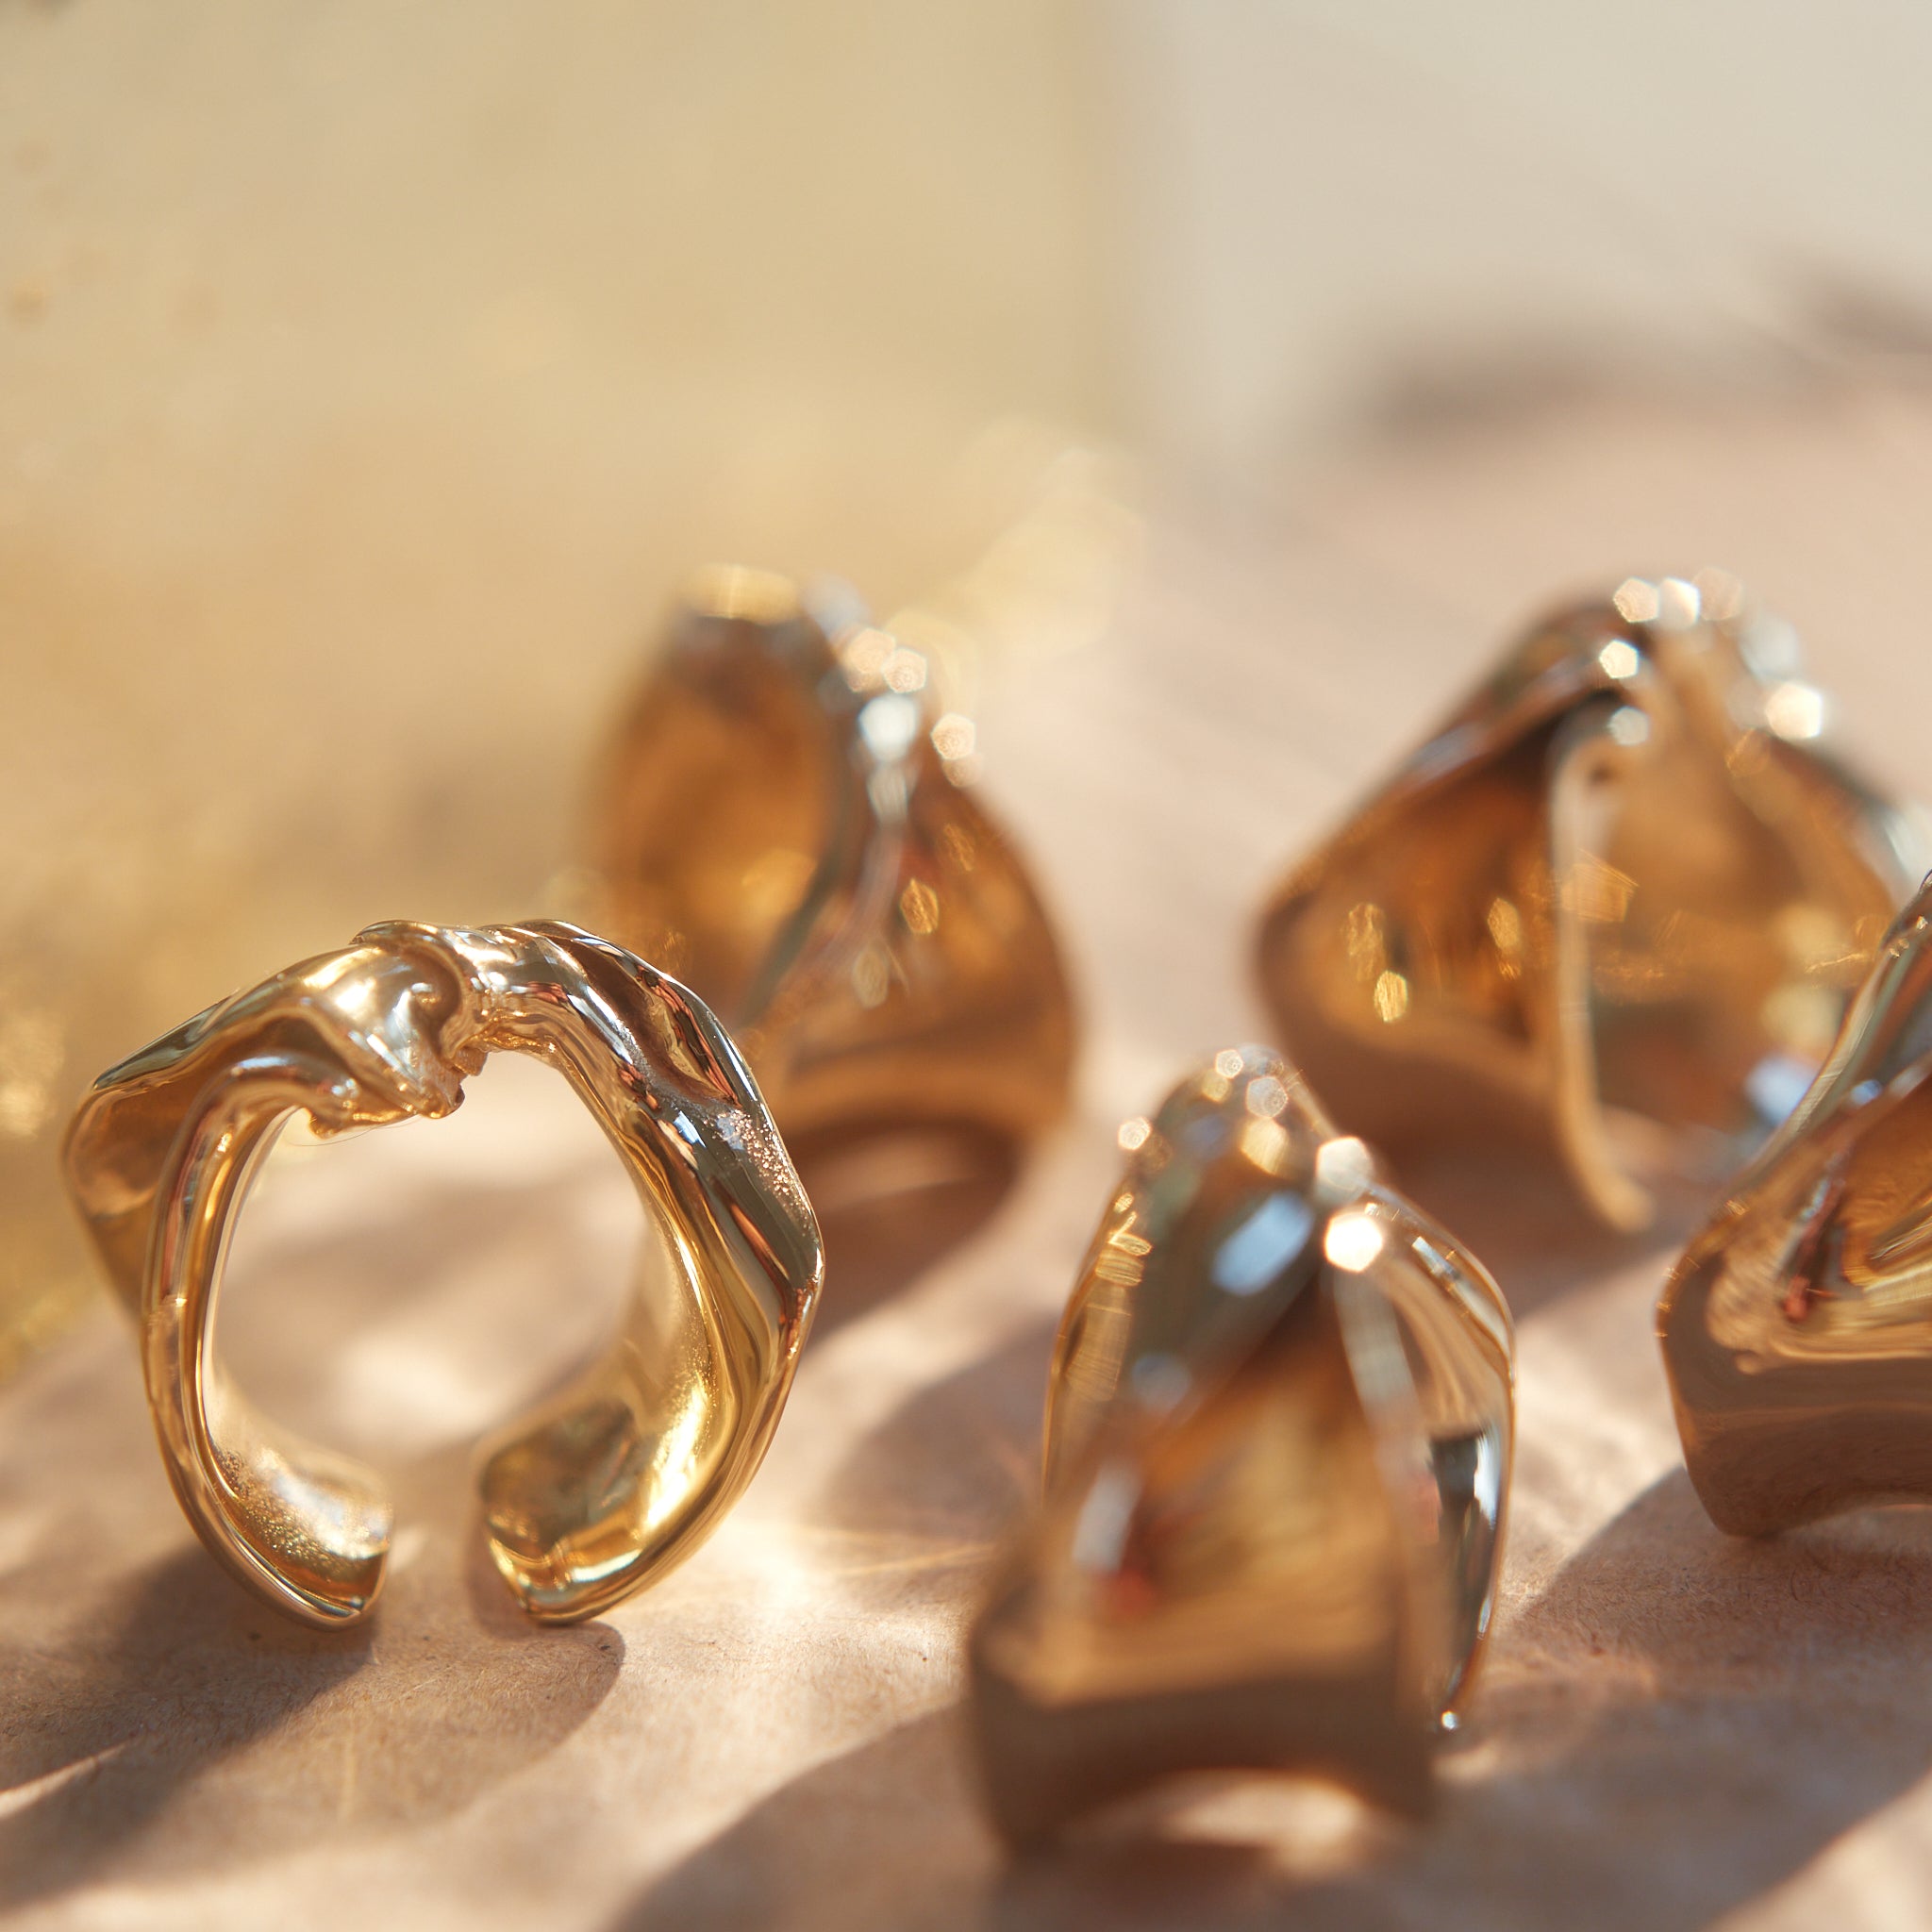 Fluid twisted ring | Gold Plated